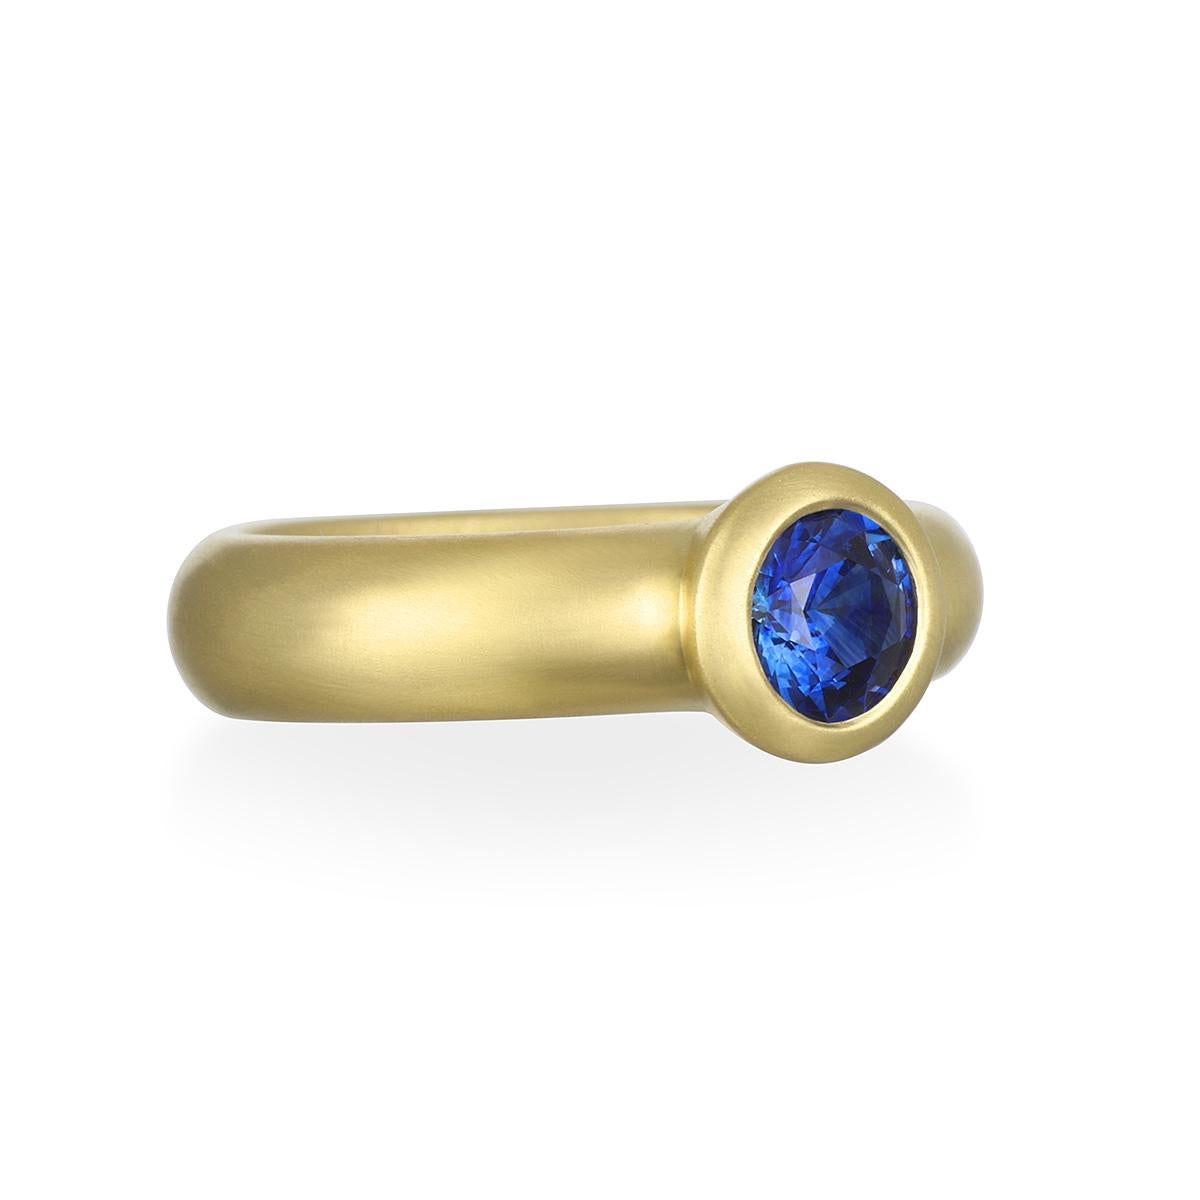 A beautiful, vivid shade of blue, this Ceylon Blue Sapphire round bezel ring is bezel set in 18K gold* with a matte finish for a clean, timeless look. It can be worn alone as a statement piece or stacked with other rings. Model pictured wearing